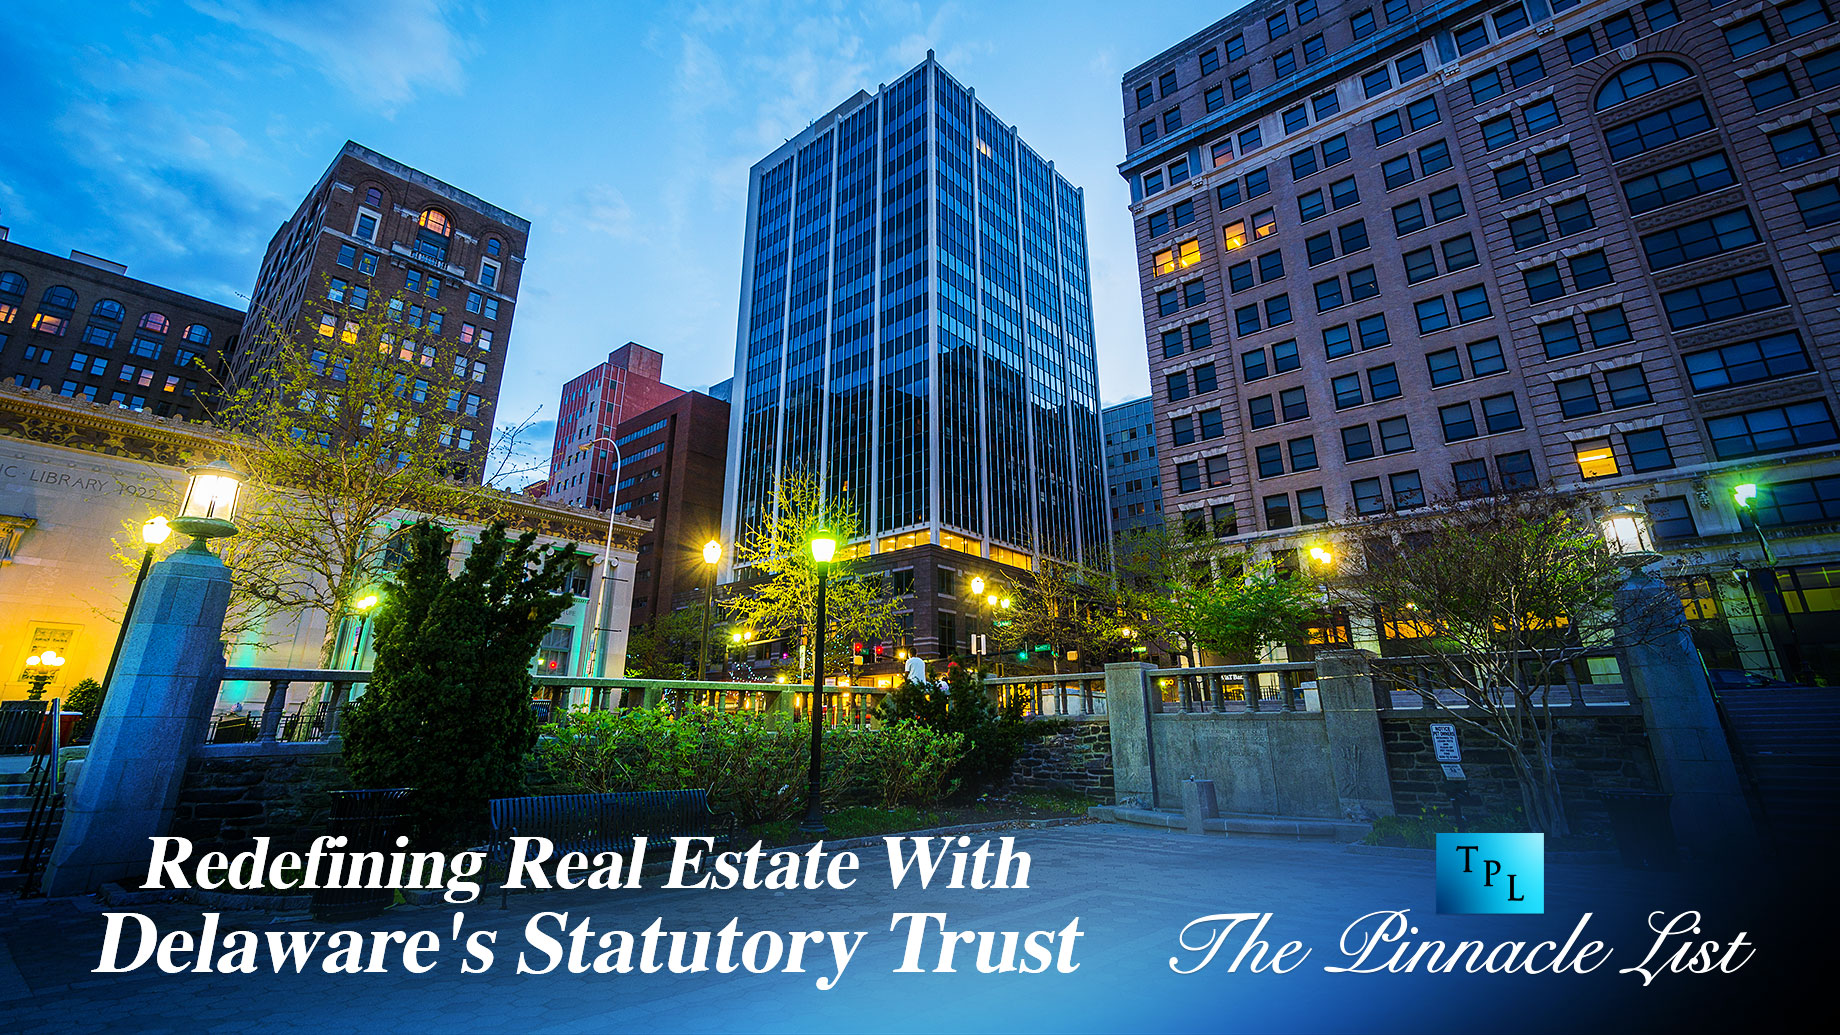 Redefining Real Estate With Delaware's Statutory Trust